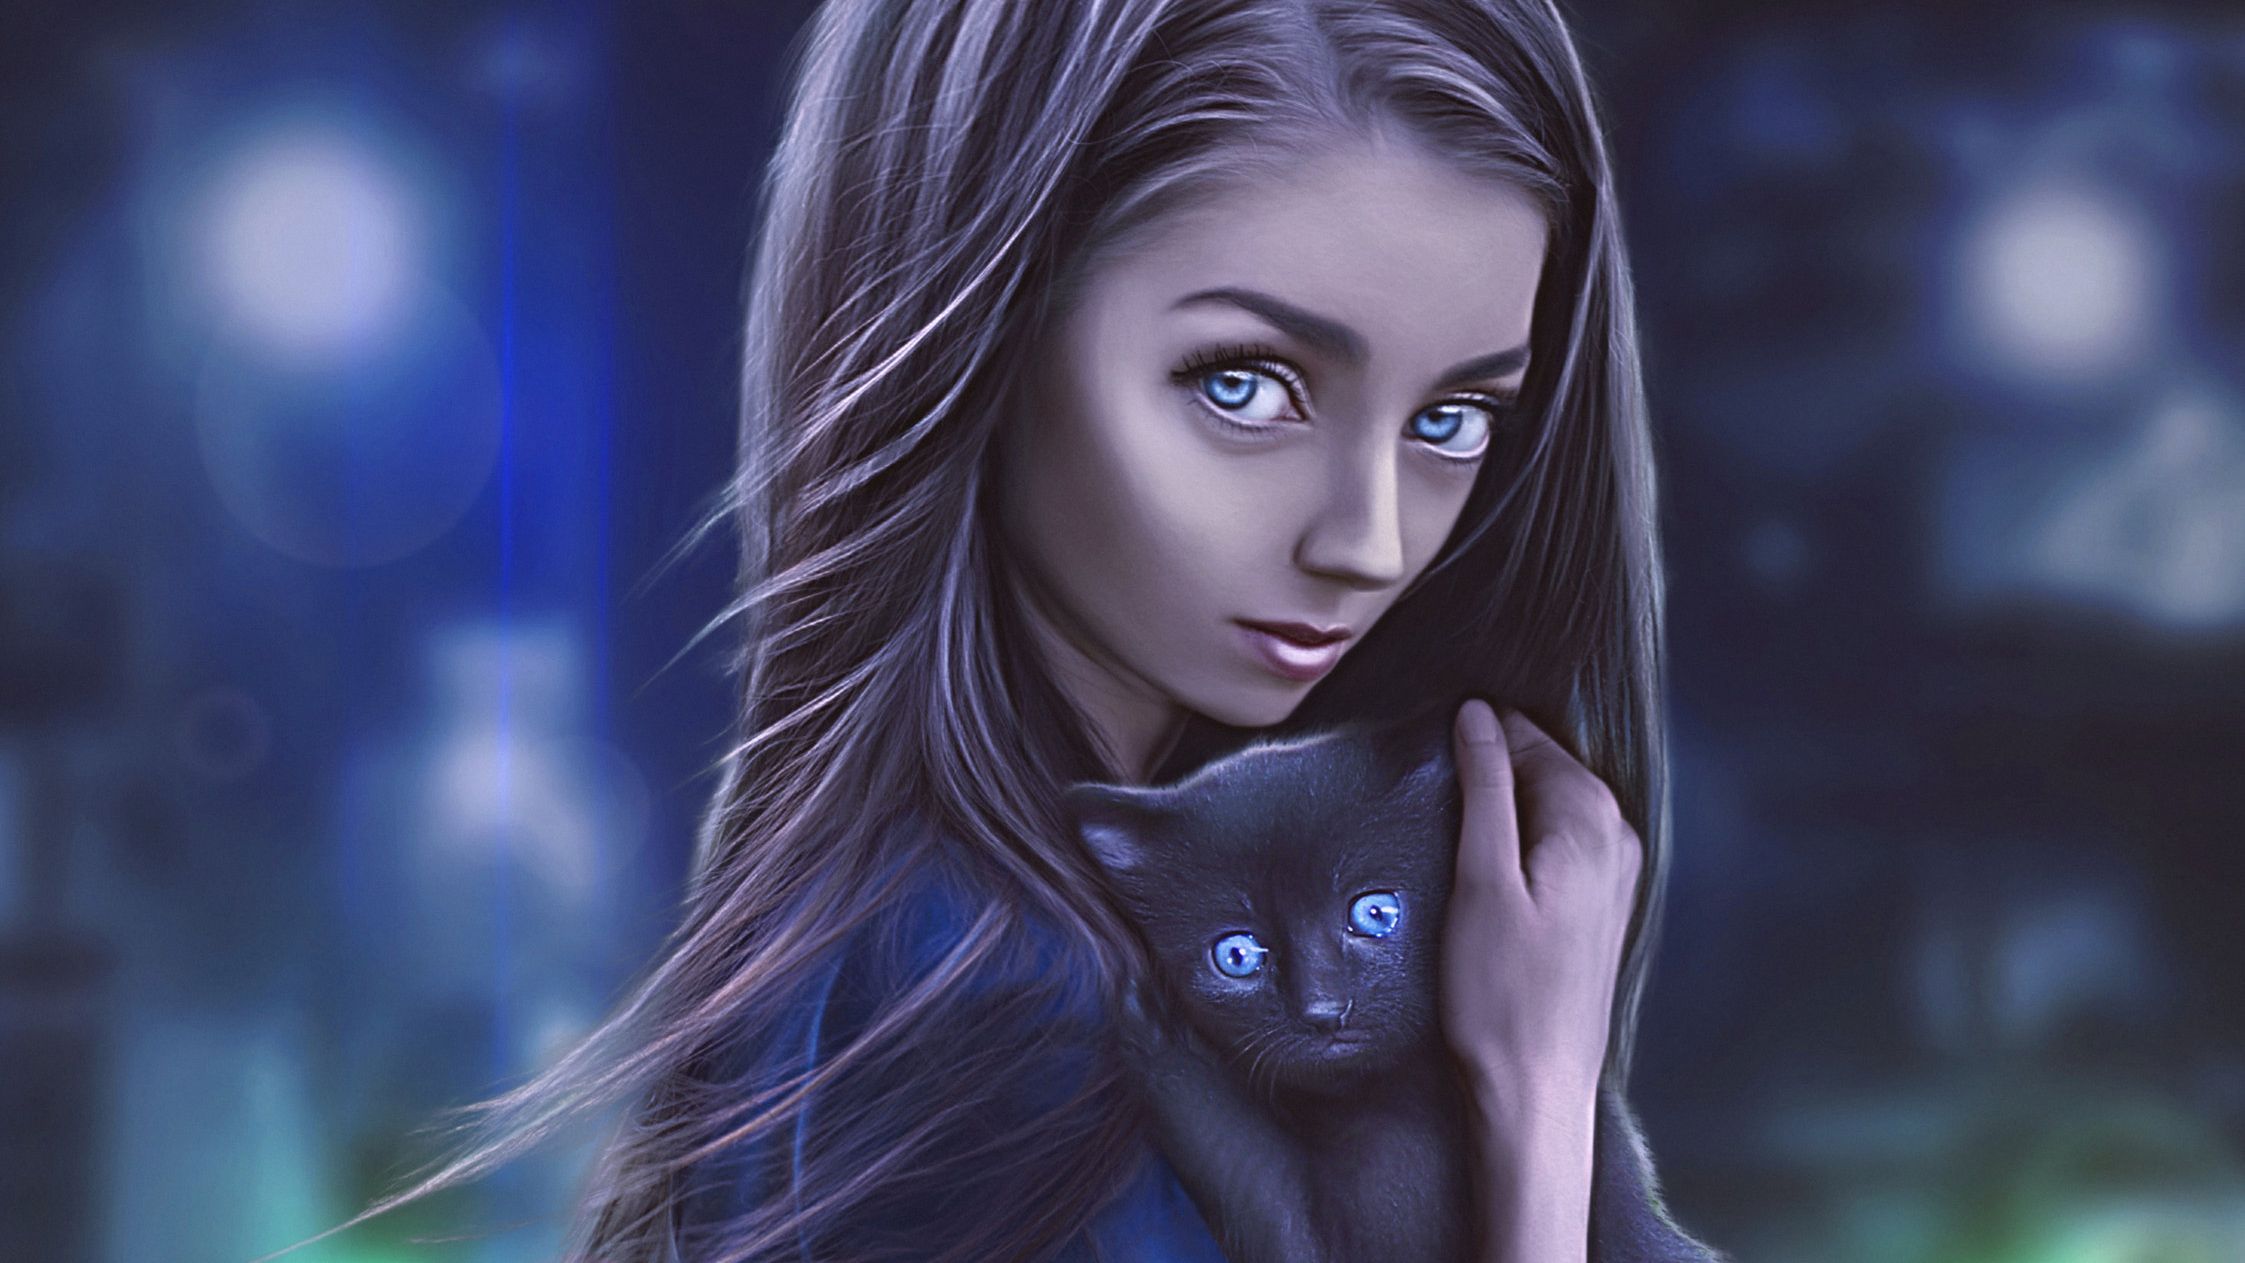 Digital Girl With Cat, HD Artist, 4k Wallpaper, Image, Background, Photo and Picture